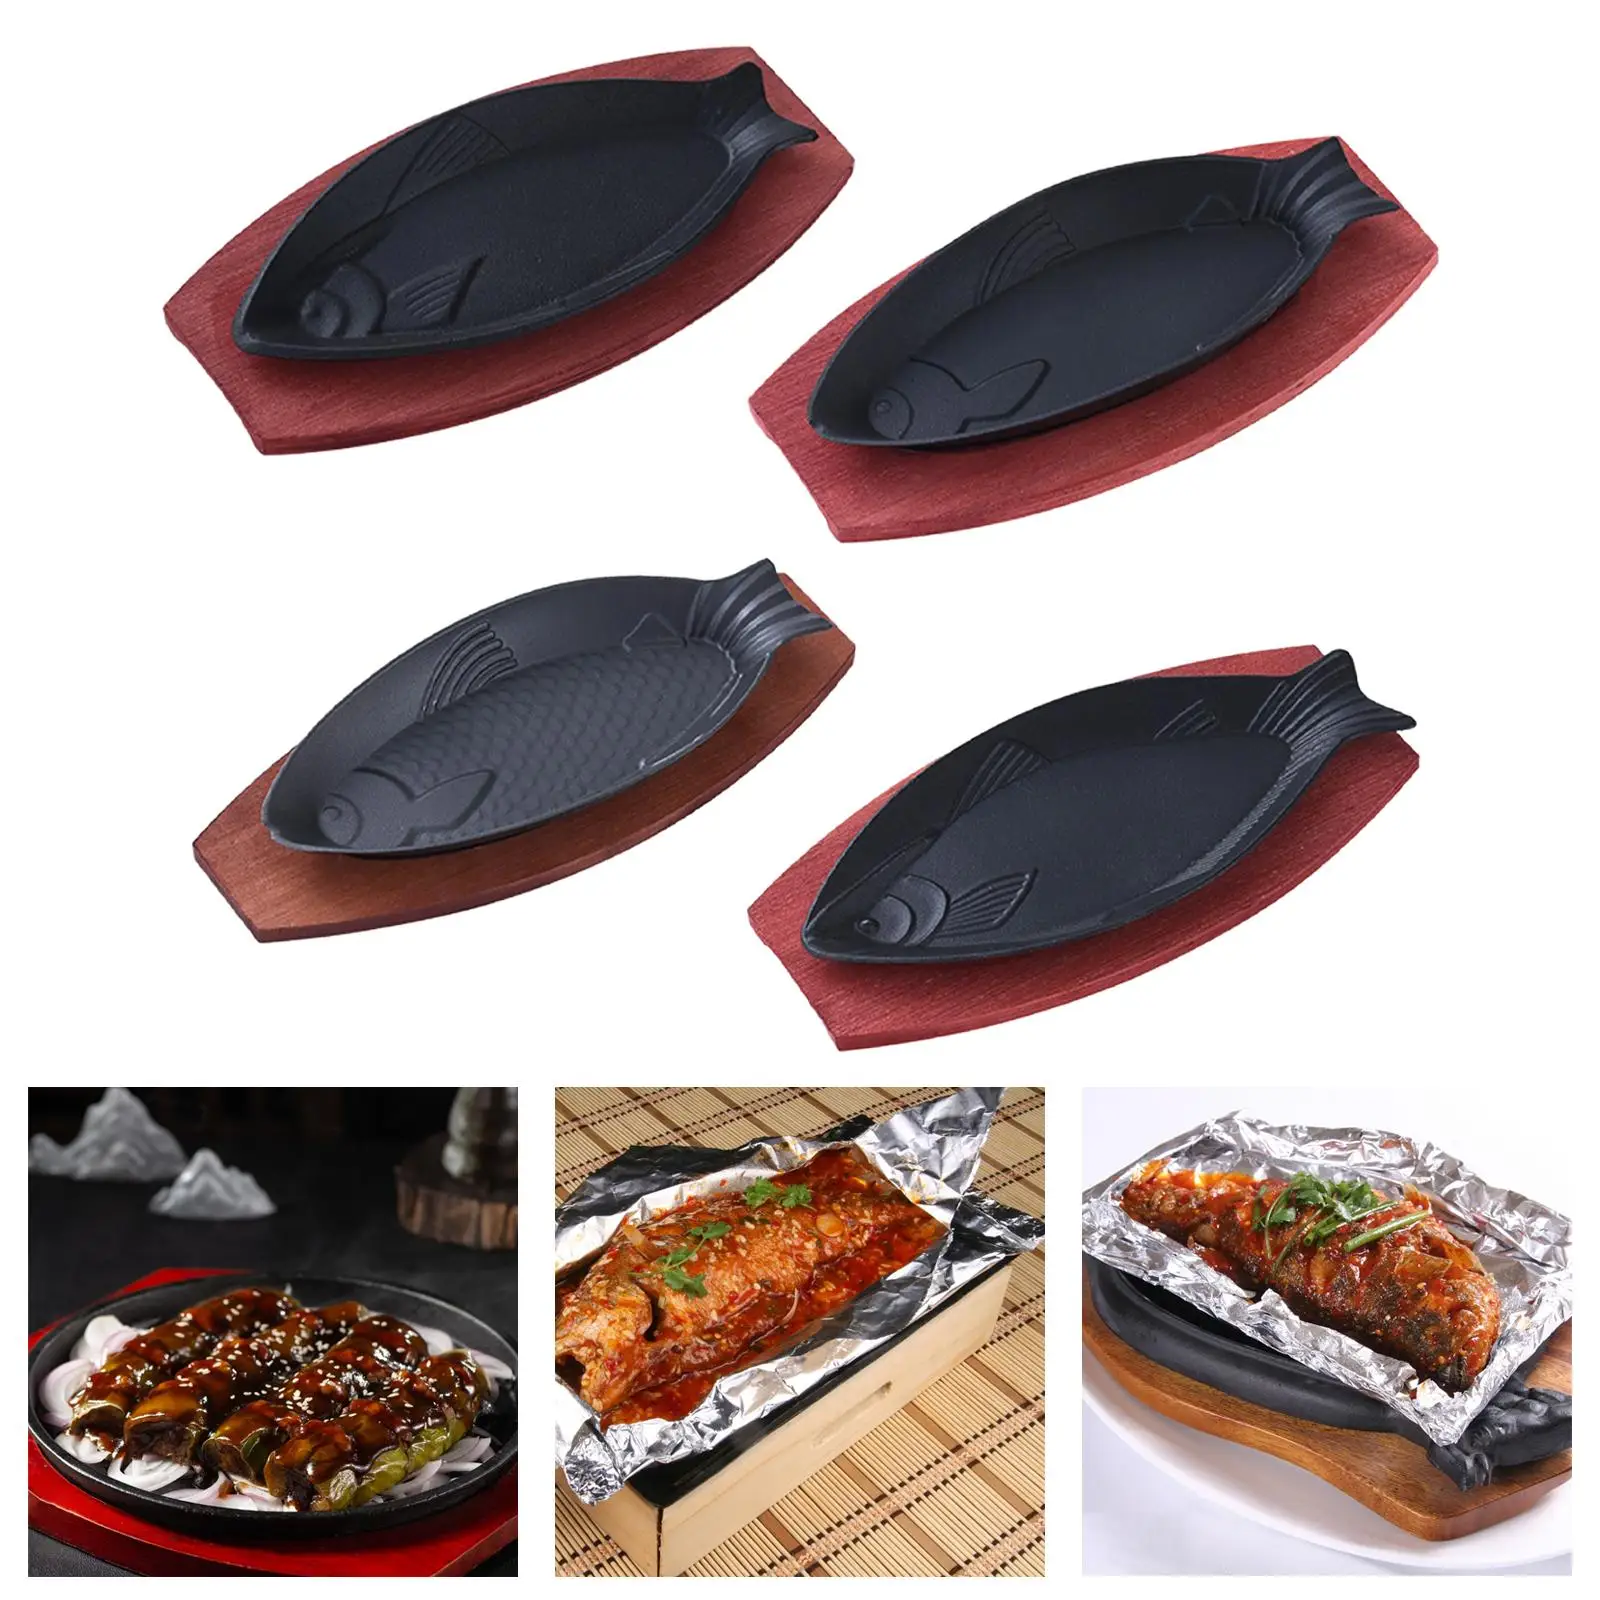 Griddle Steak Fry Plate Steak Serving Plate Fish Shaped Fryer Cast Iron Nonstick Skillet Hot Plate BBQ Grilling Pan for Home